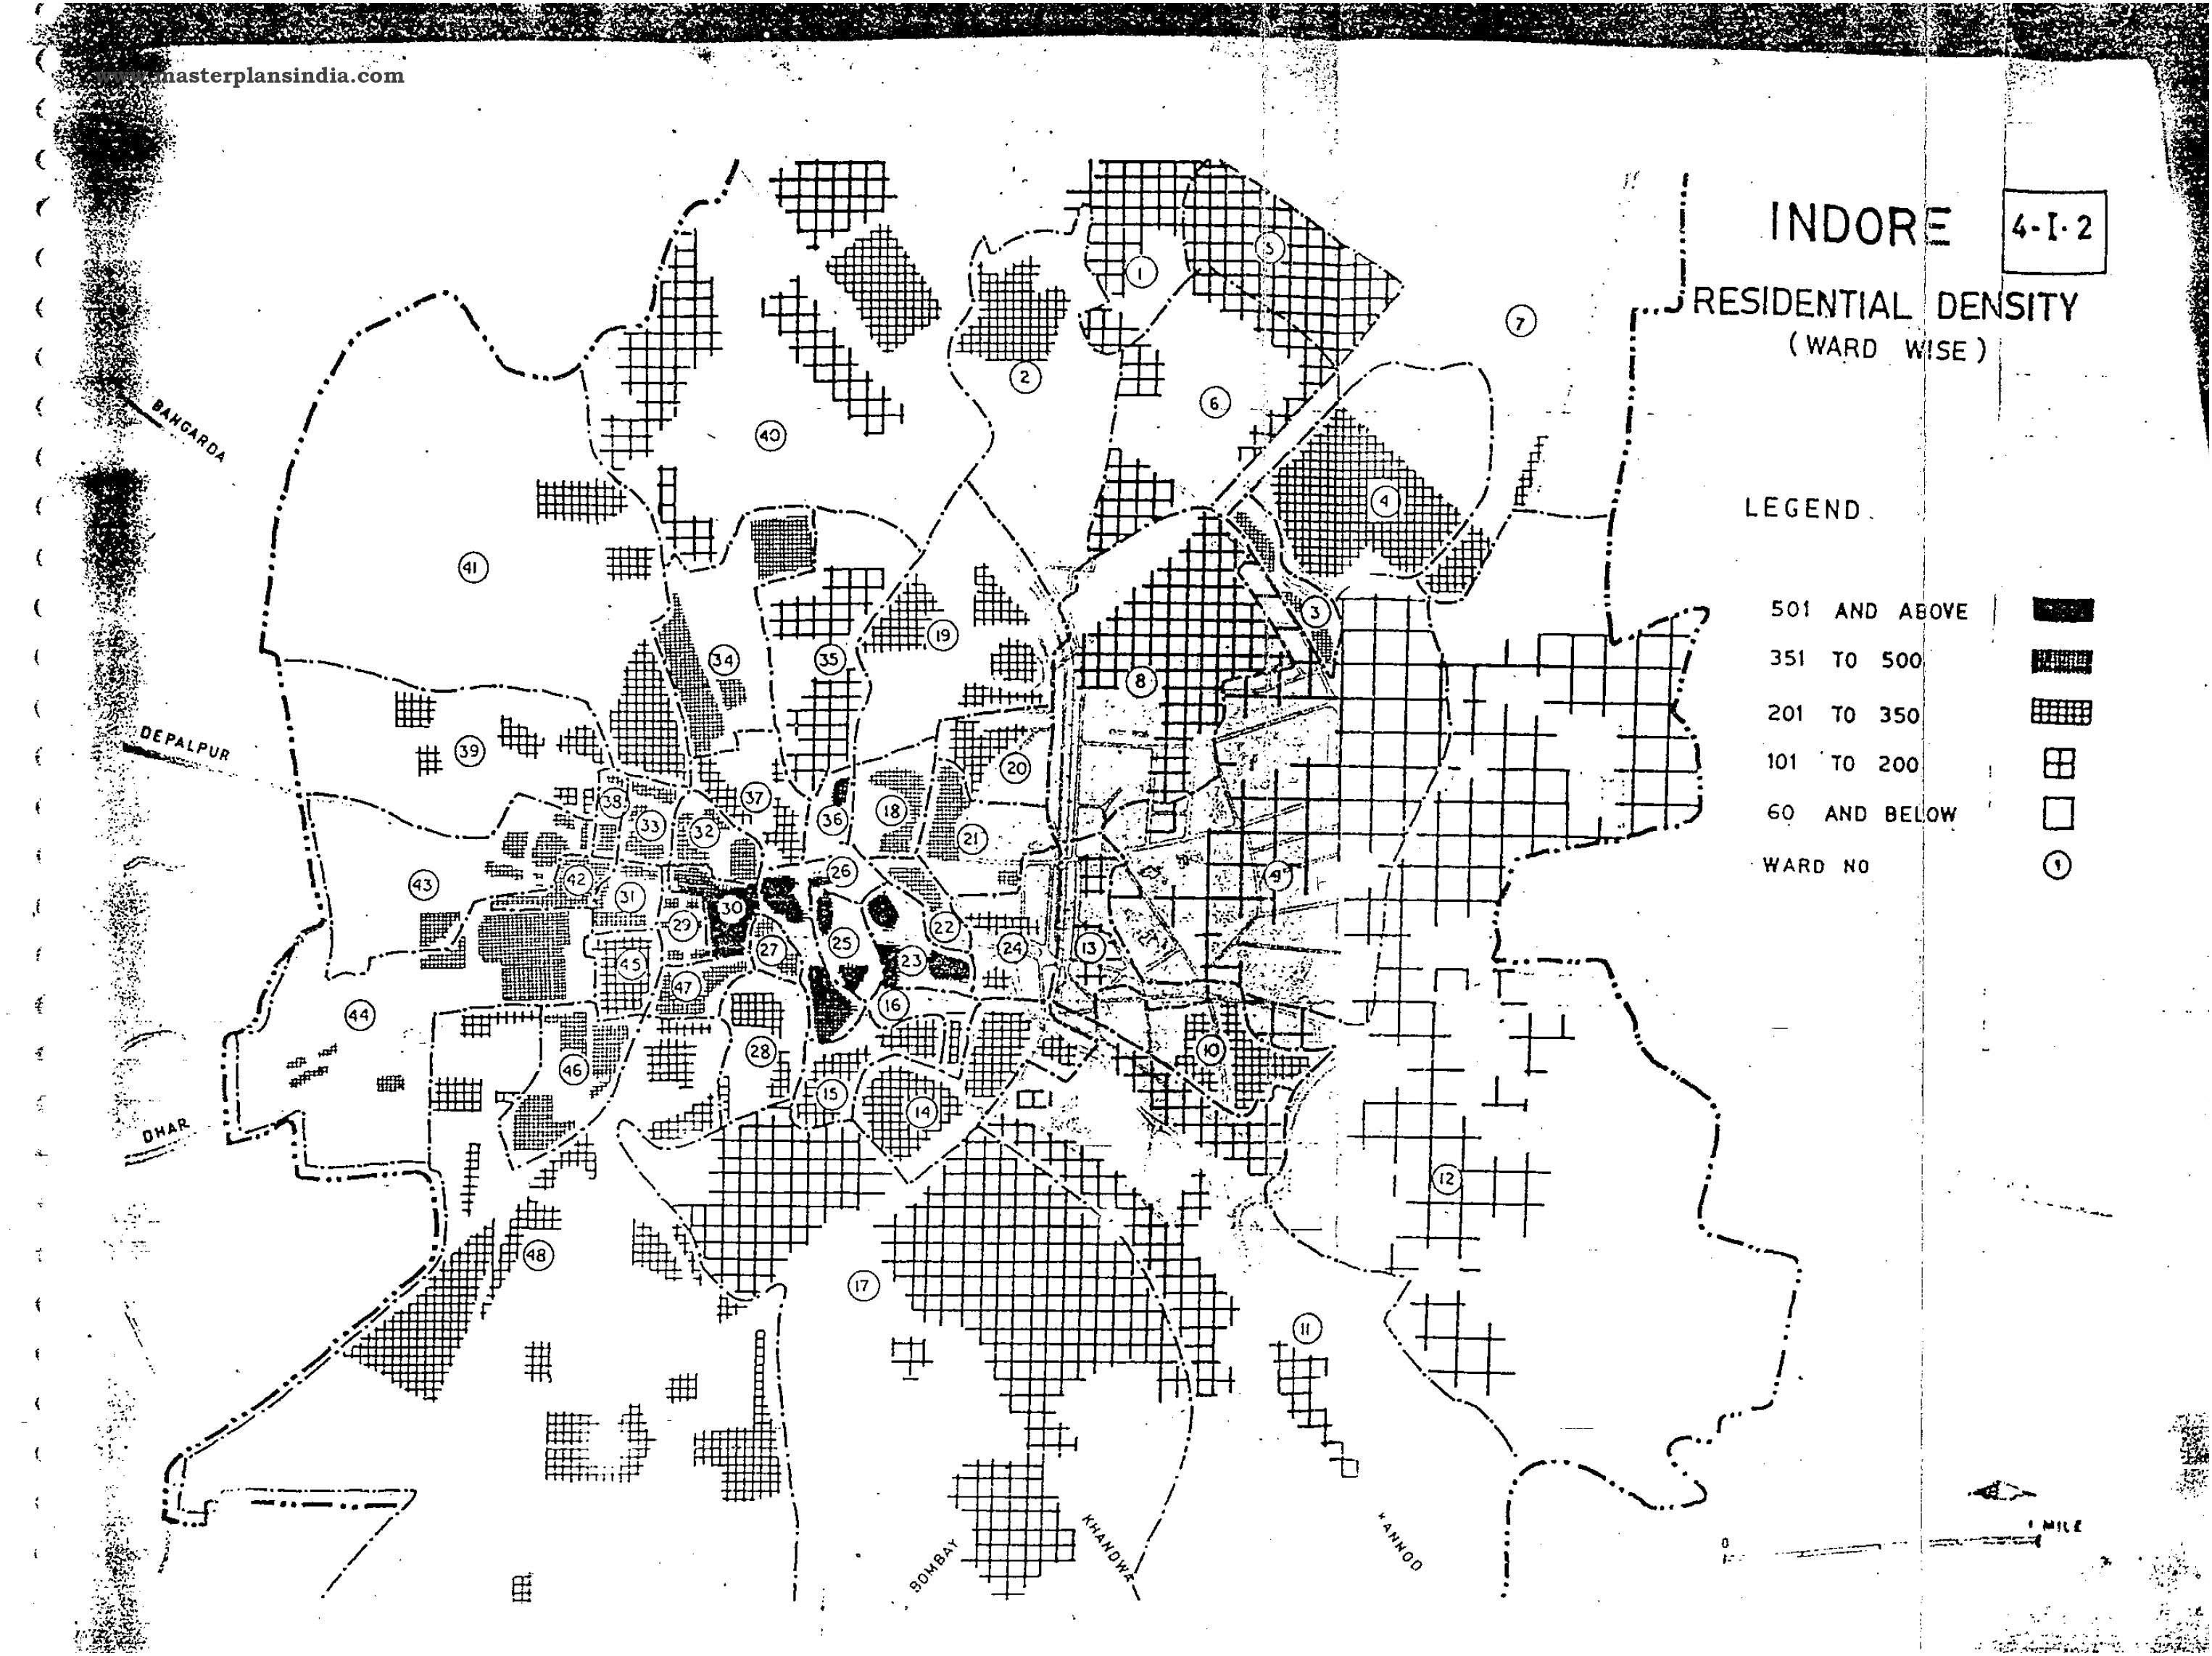 Indore Presidential Density Map 